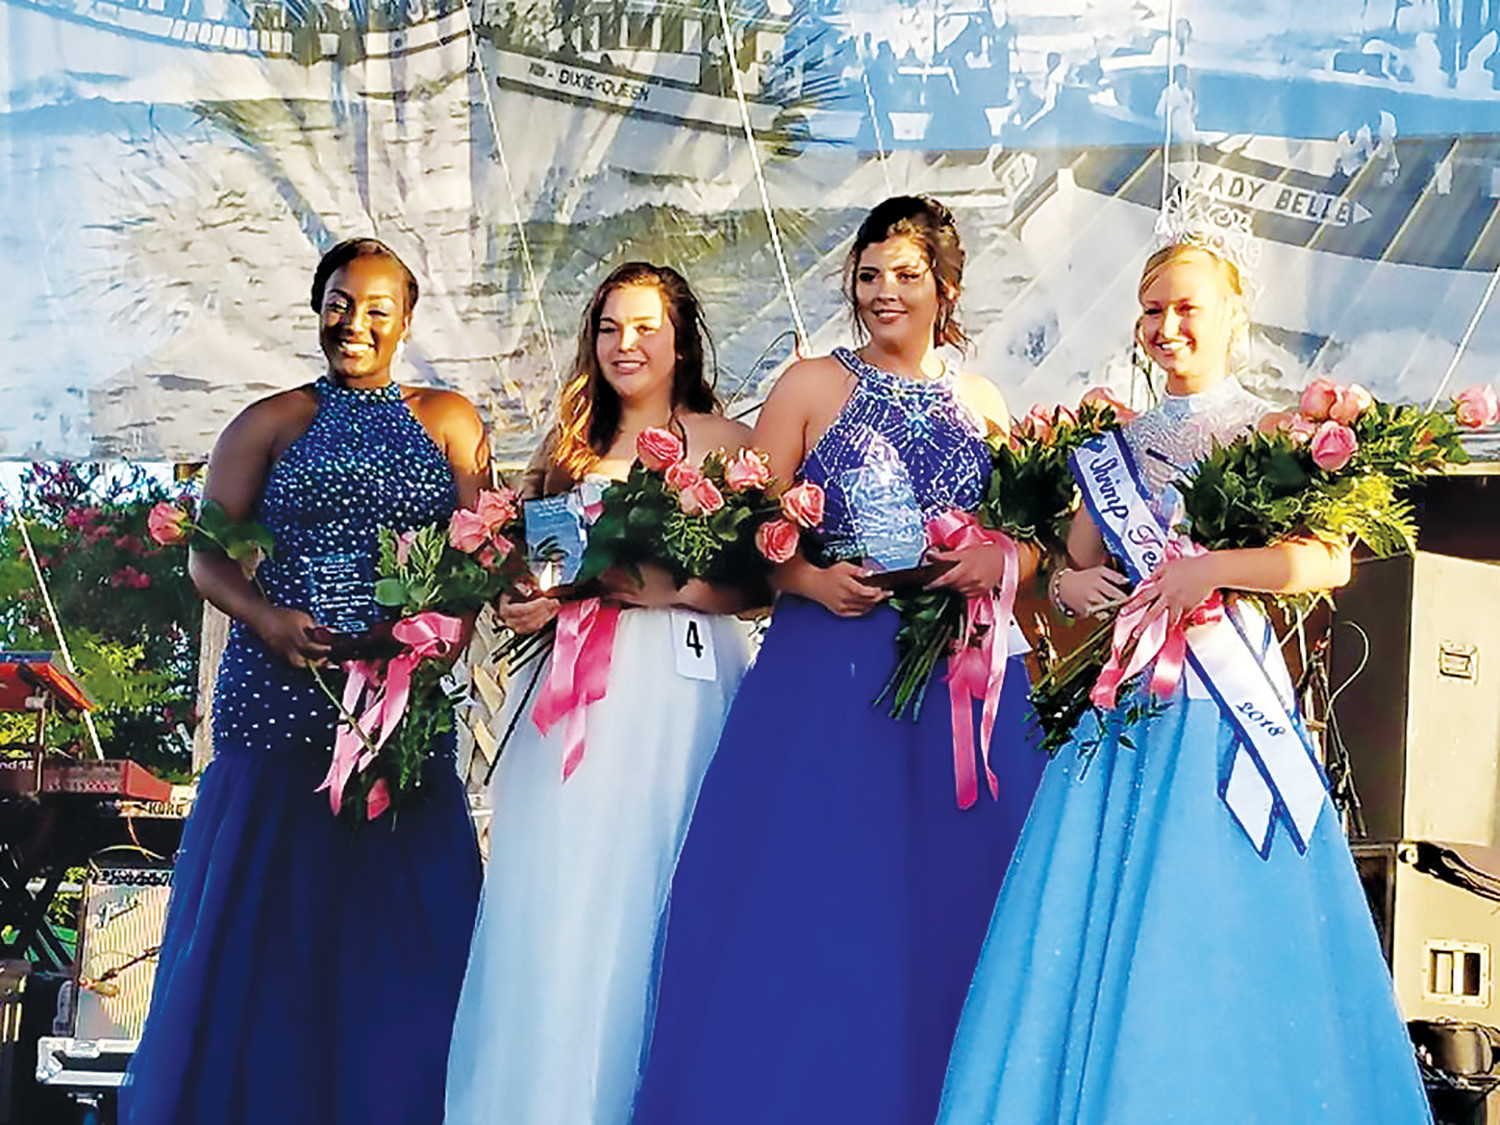 The 55th annual Isle of Eight Flags Shrimp Festival featured the Miss Shrimp Festival Scholarship Pageant, among several other events. Displayed in the photo are Miss Congeniality Arriell Drayton, second runner-up Taylor Alvare, first runner-up Olivia Liliskis and Miss Shrimp Festival Pageant winner Emily Colson.